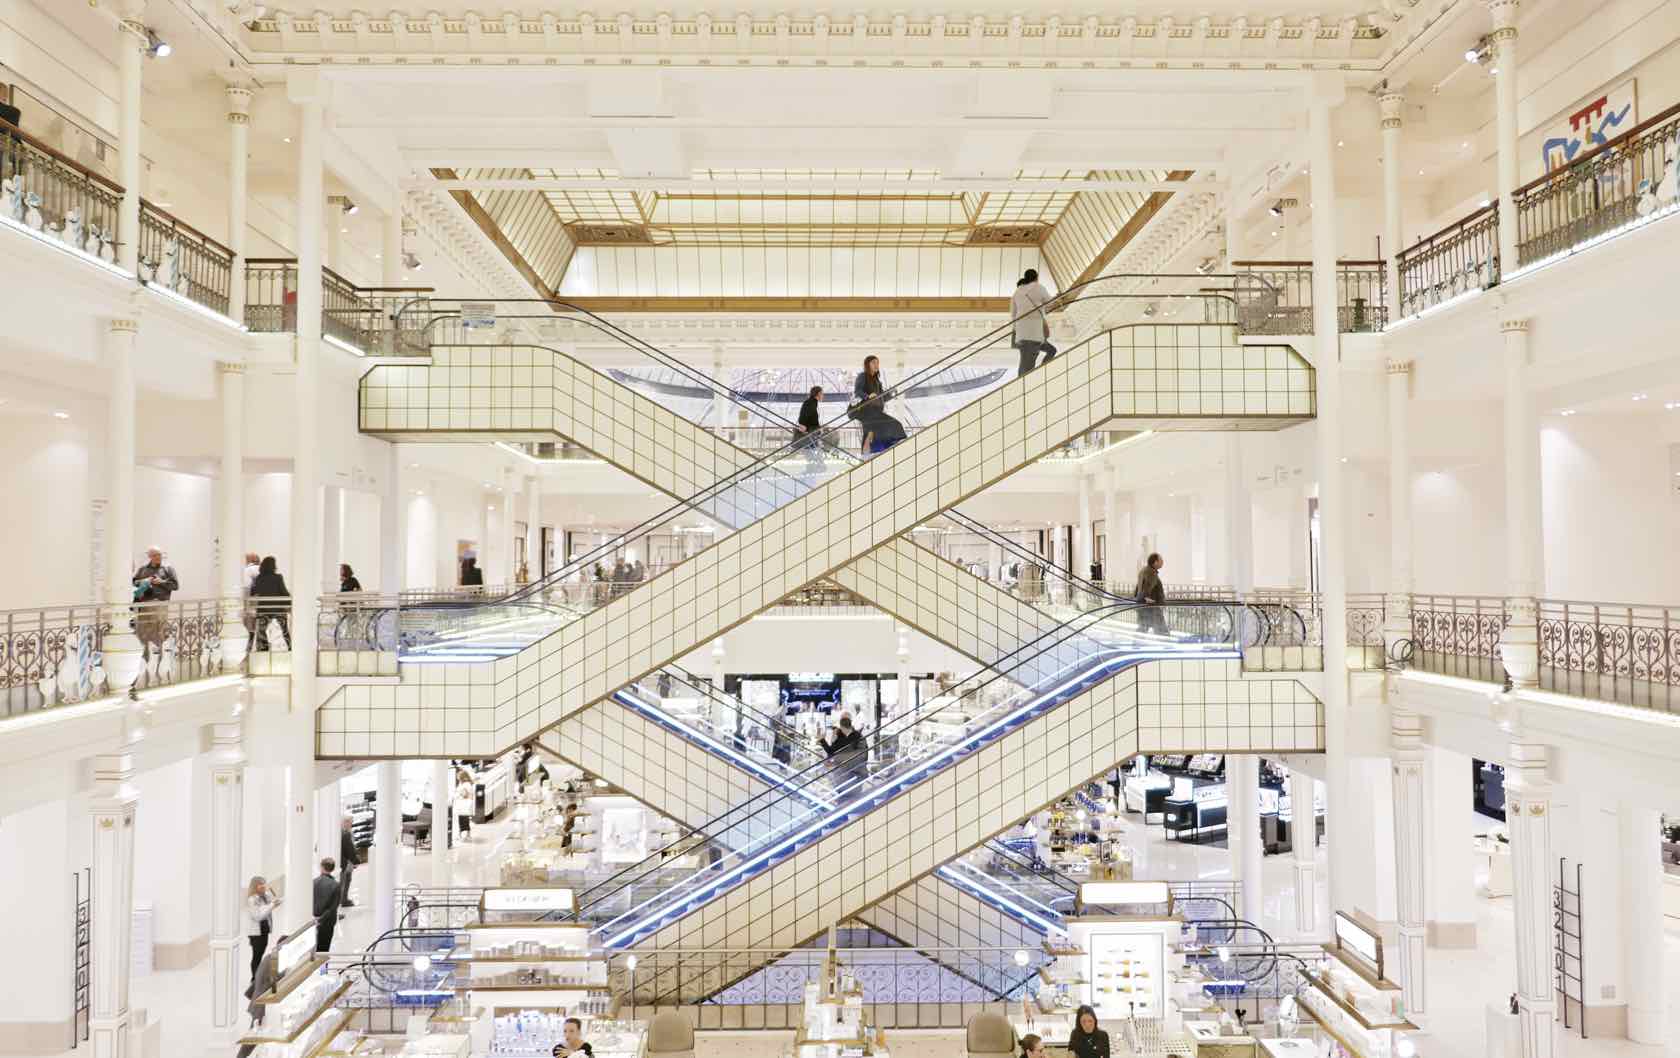 Image of department store in Paris Bon Marche (founded in 1852 by